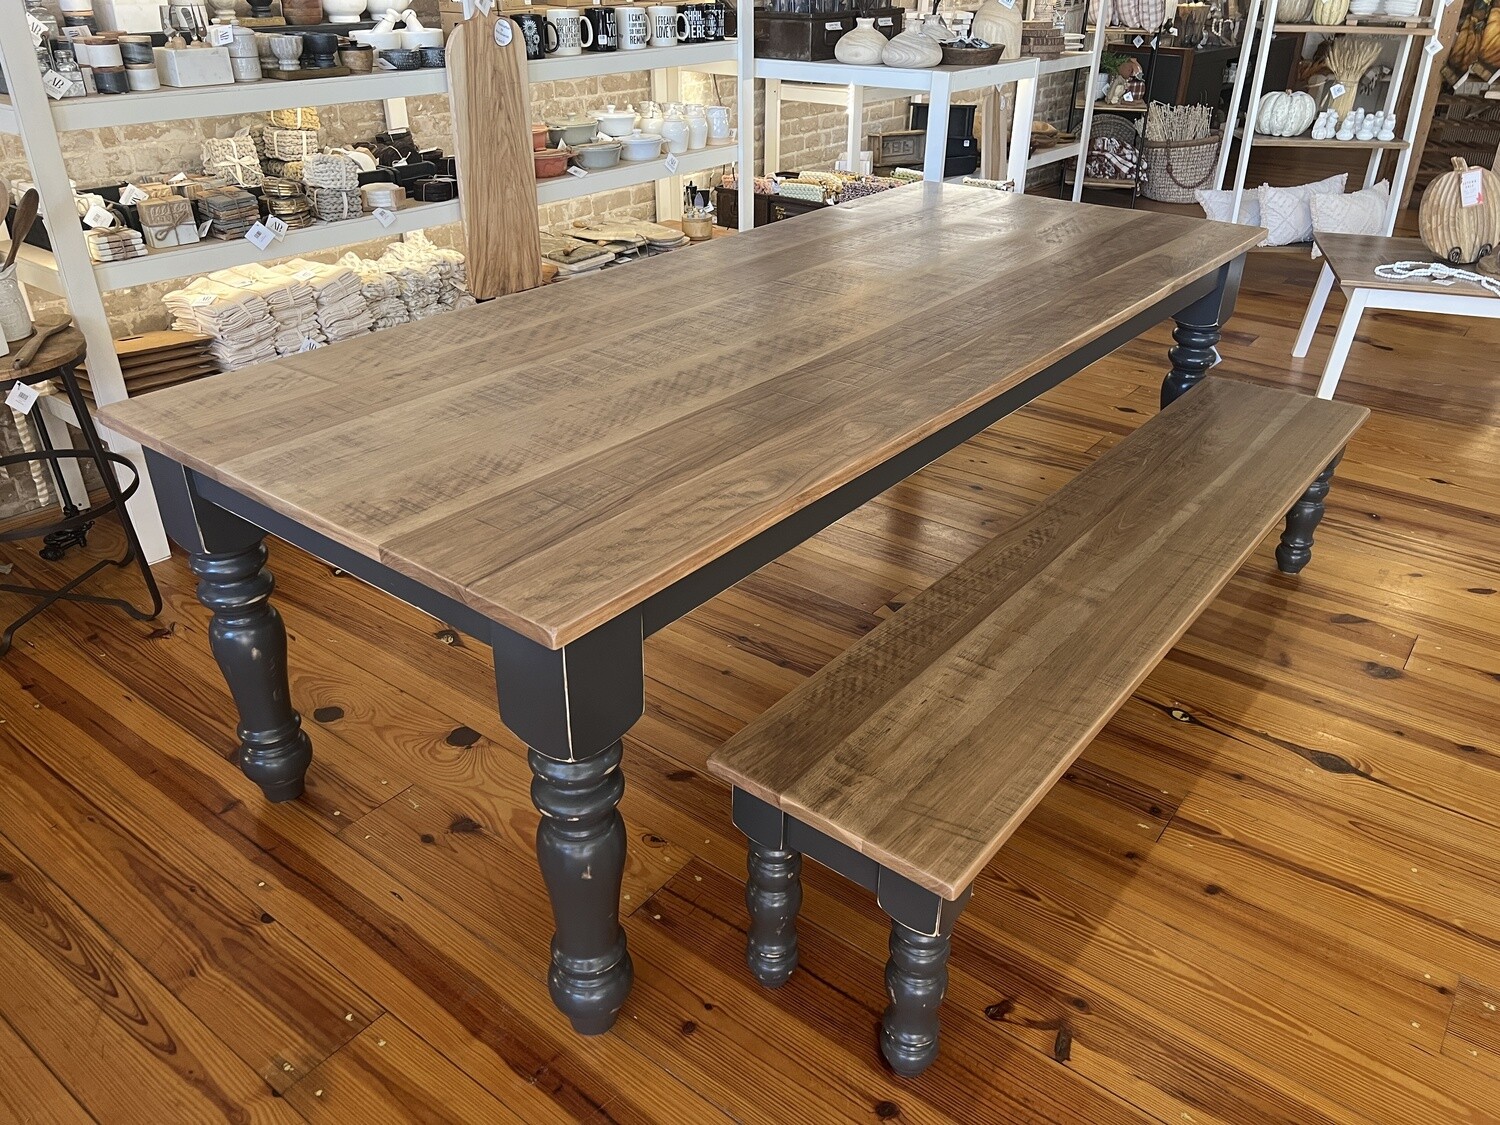 AB 8' Turned Leg Table/Bench